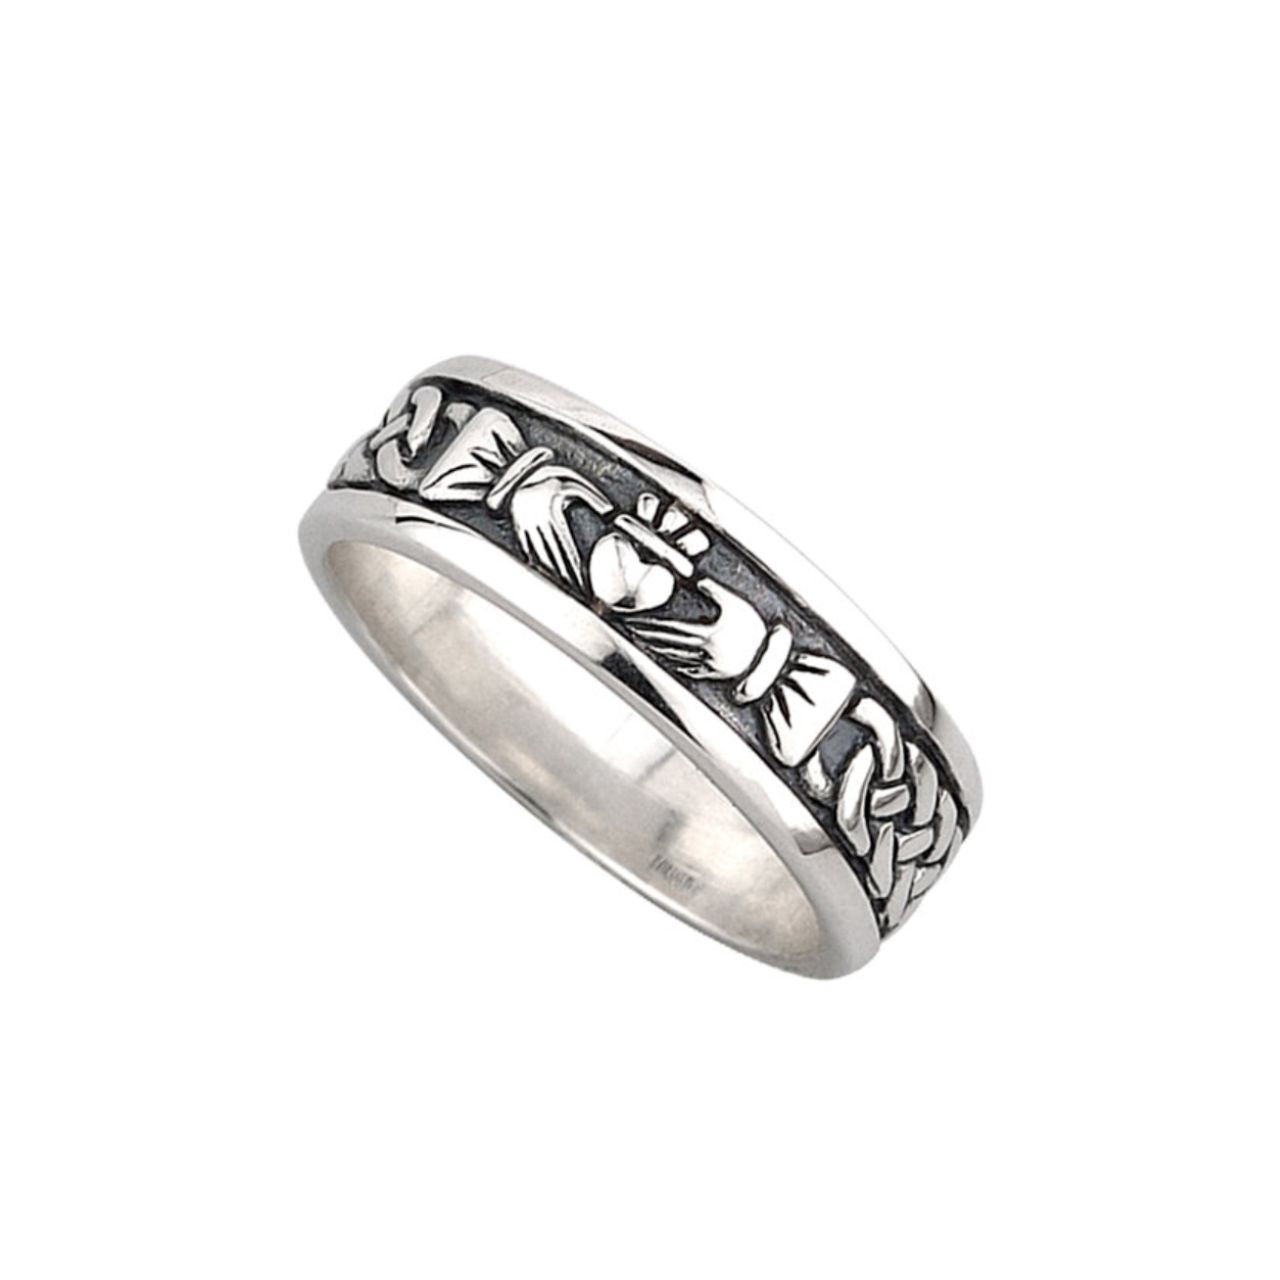 Solvar Oxidised Silver Claddagh Band  This striking sterling silver ring for gentlemen is made from oxidised silver giving it a contemporary “blackened” look. It features the Claddagh at the centre of the band, an emblem of love and eternal devotion with its symbols representing love (heart), friendship (hands) and loyalty (crown). This oxidised Claddagh ring has been Irish hallmarked in Dublin Castle.